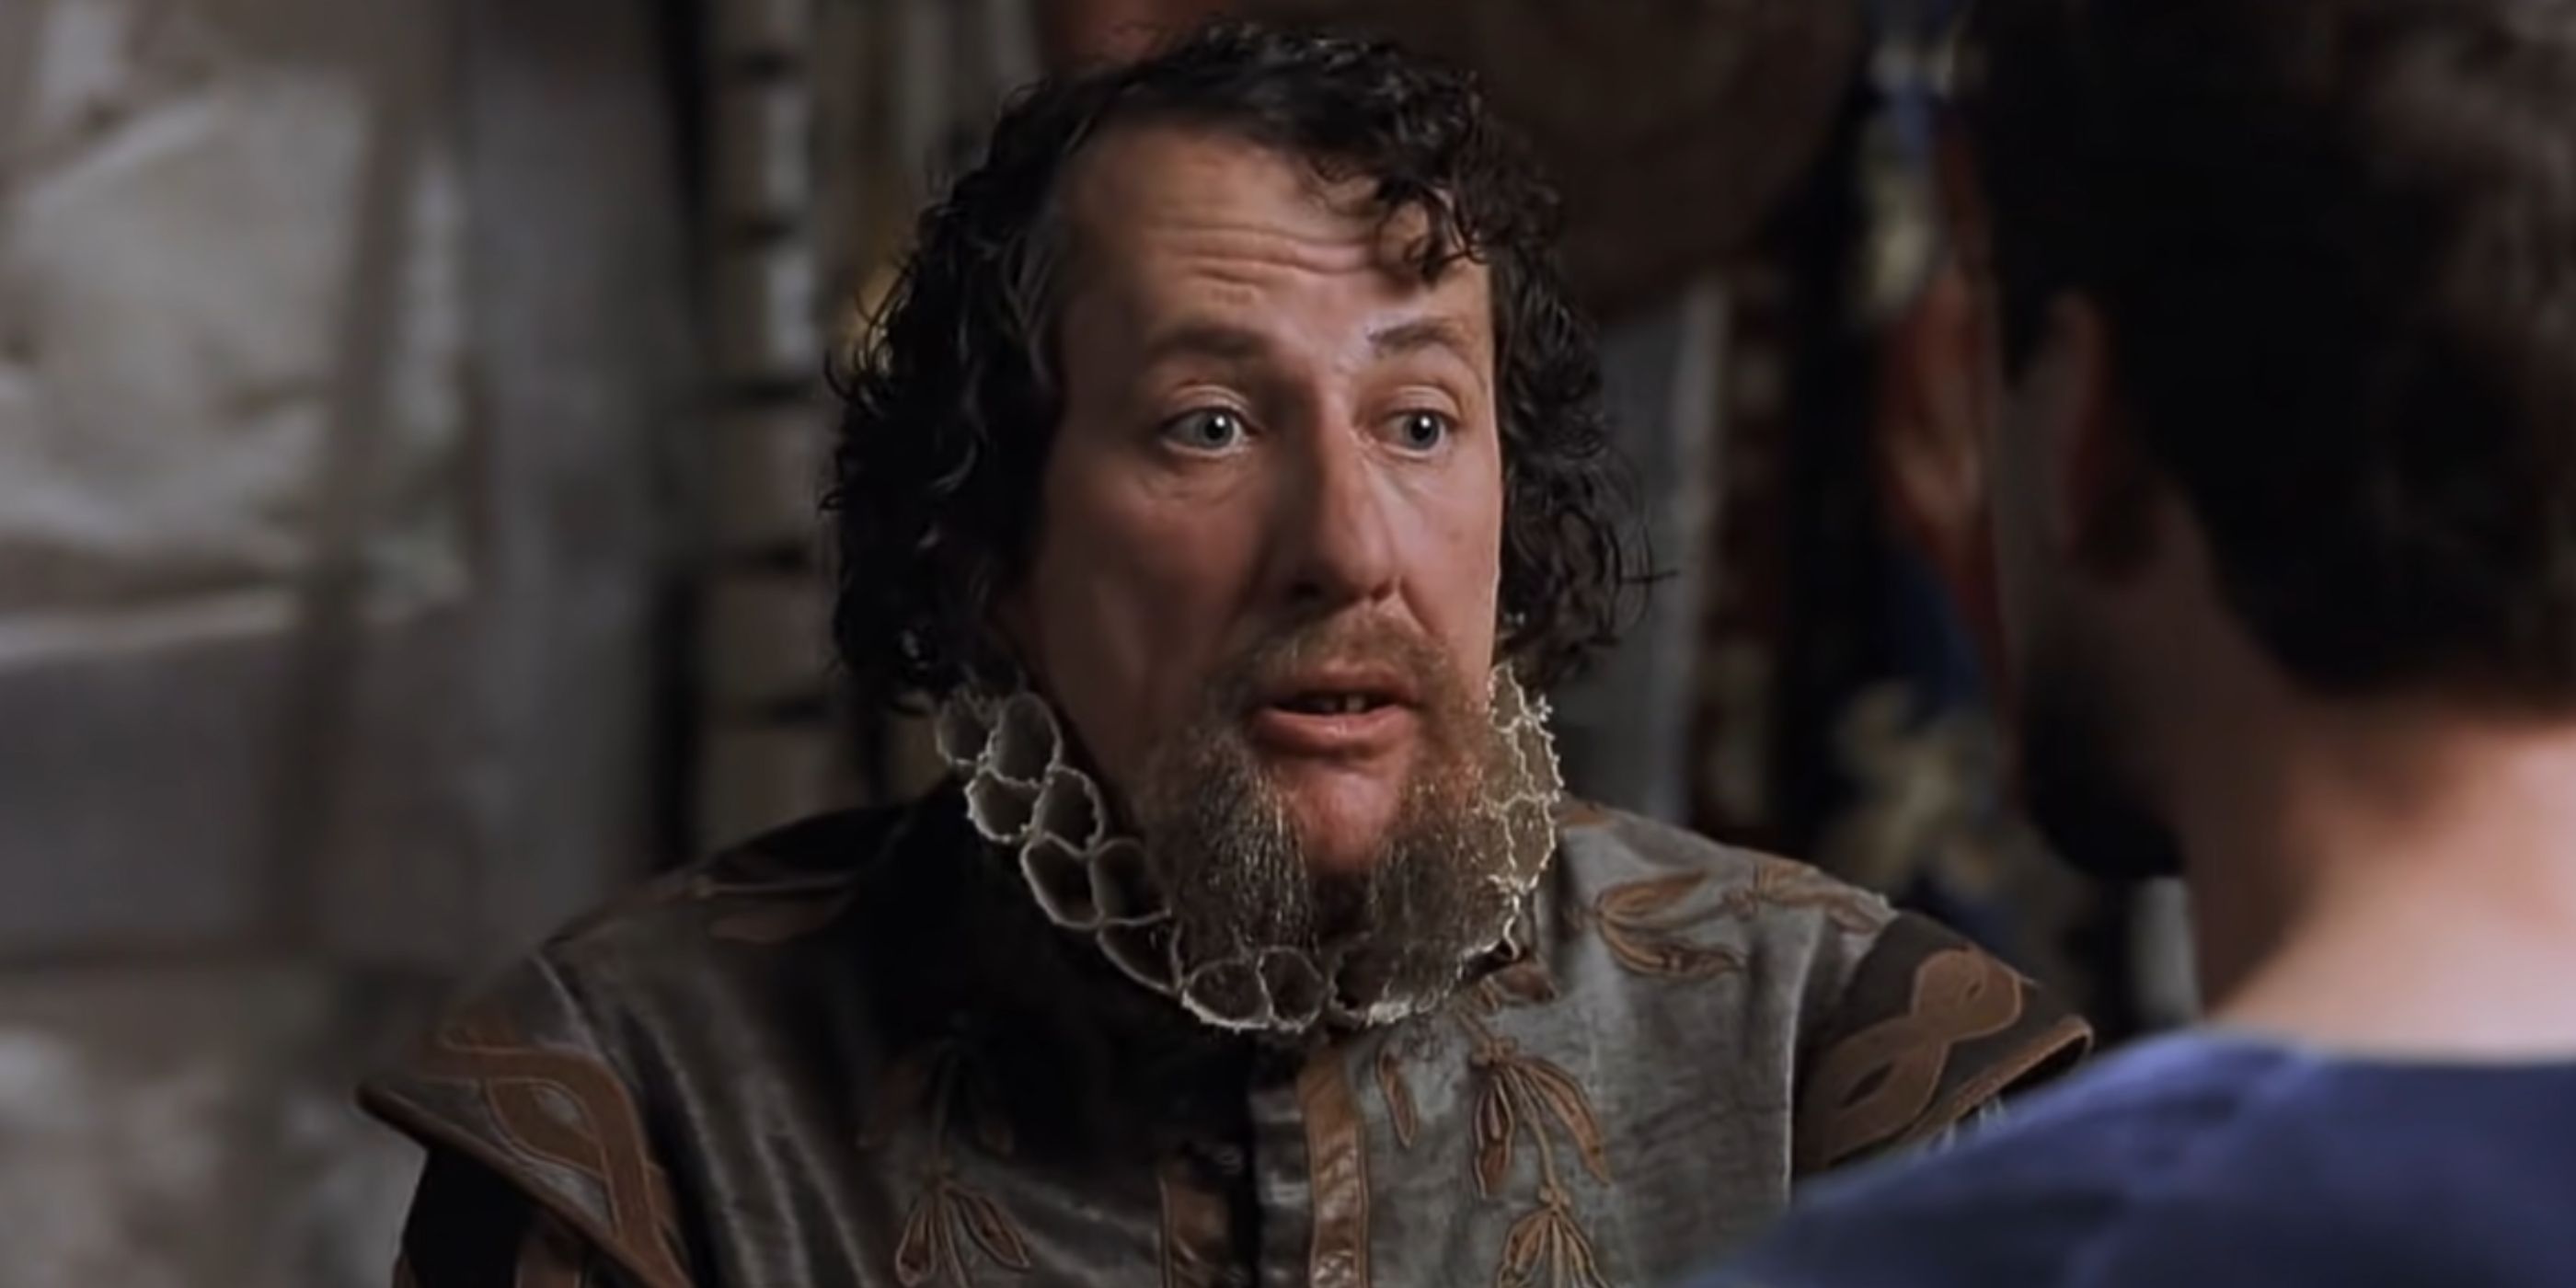 Philip Heslowe talking to someone in 'Shakespeare in Love' (1998)